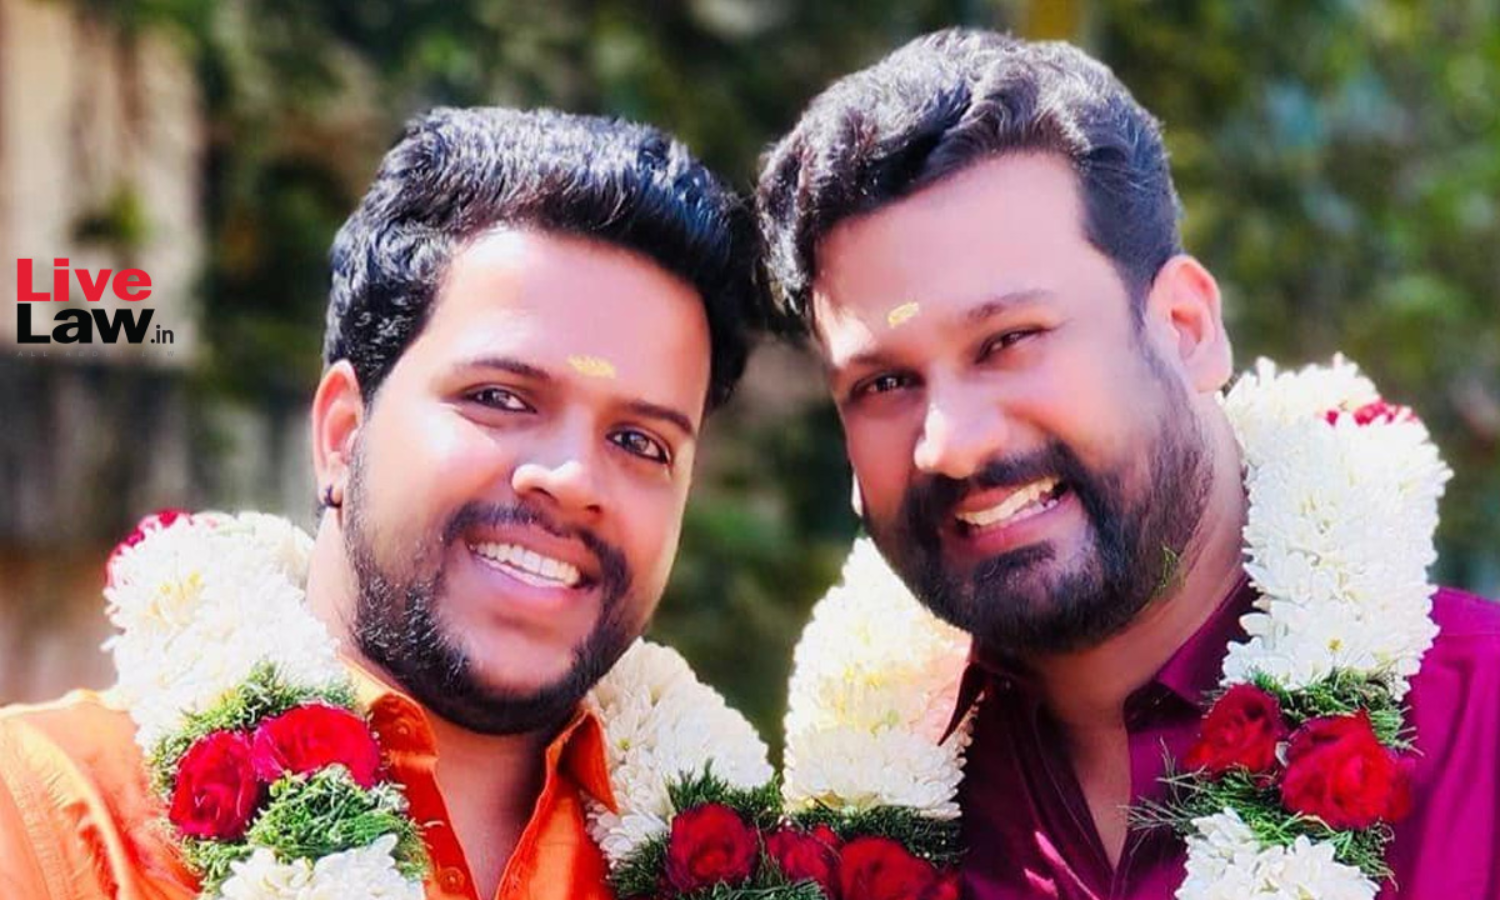 Legalising Same-Sex Marriages Interview Of Keralas First Married Gay Couple photo